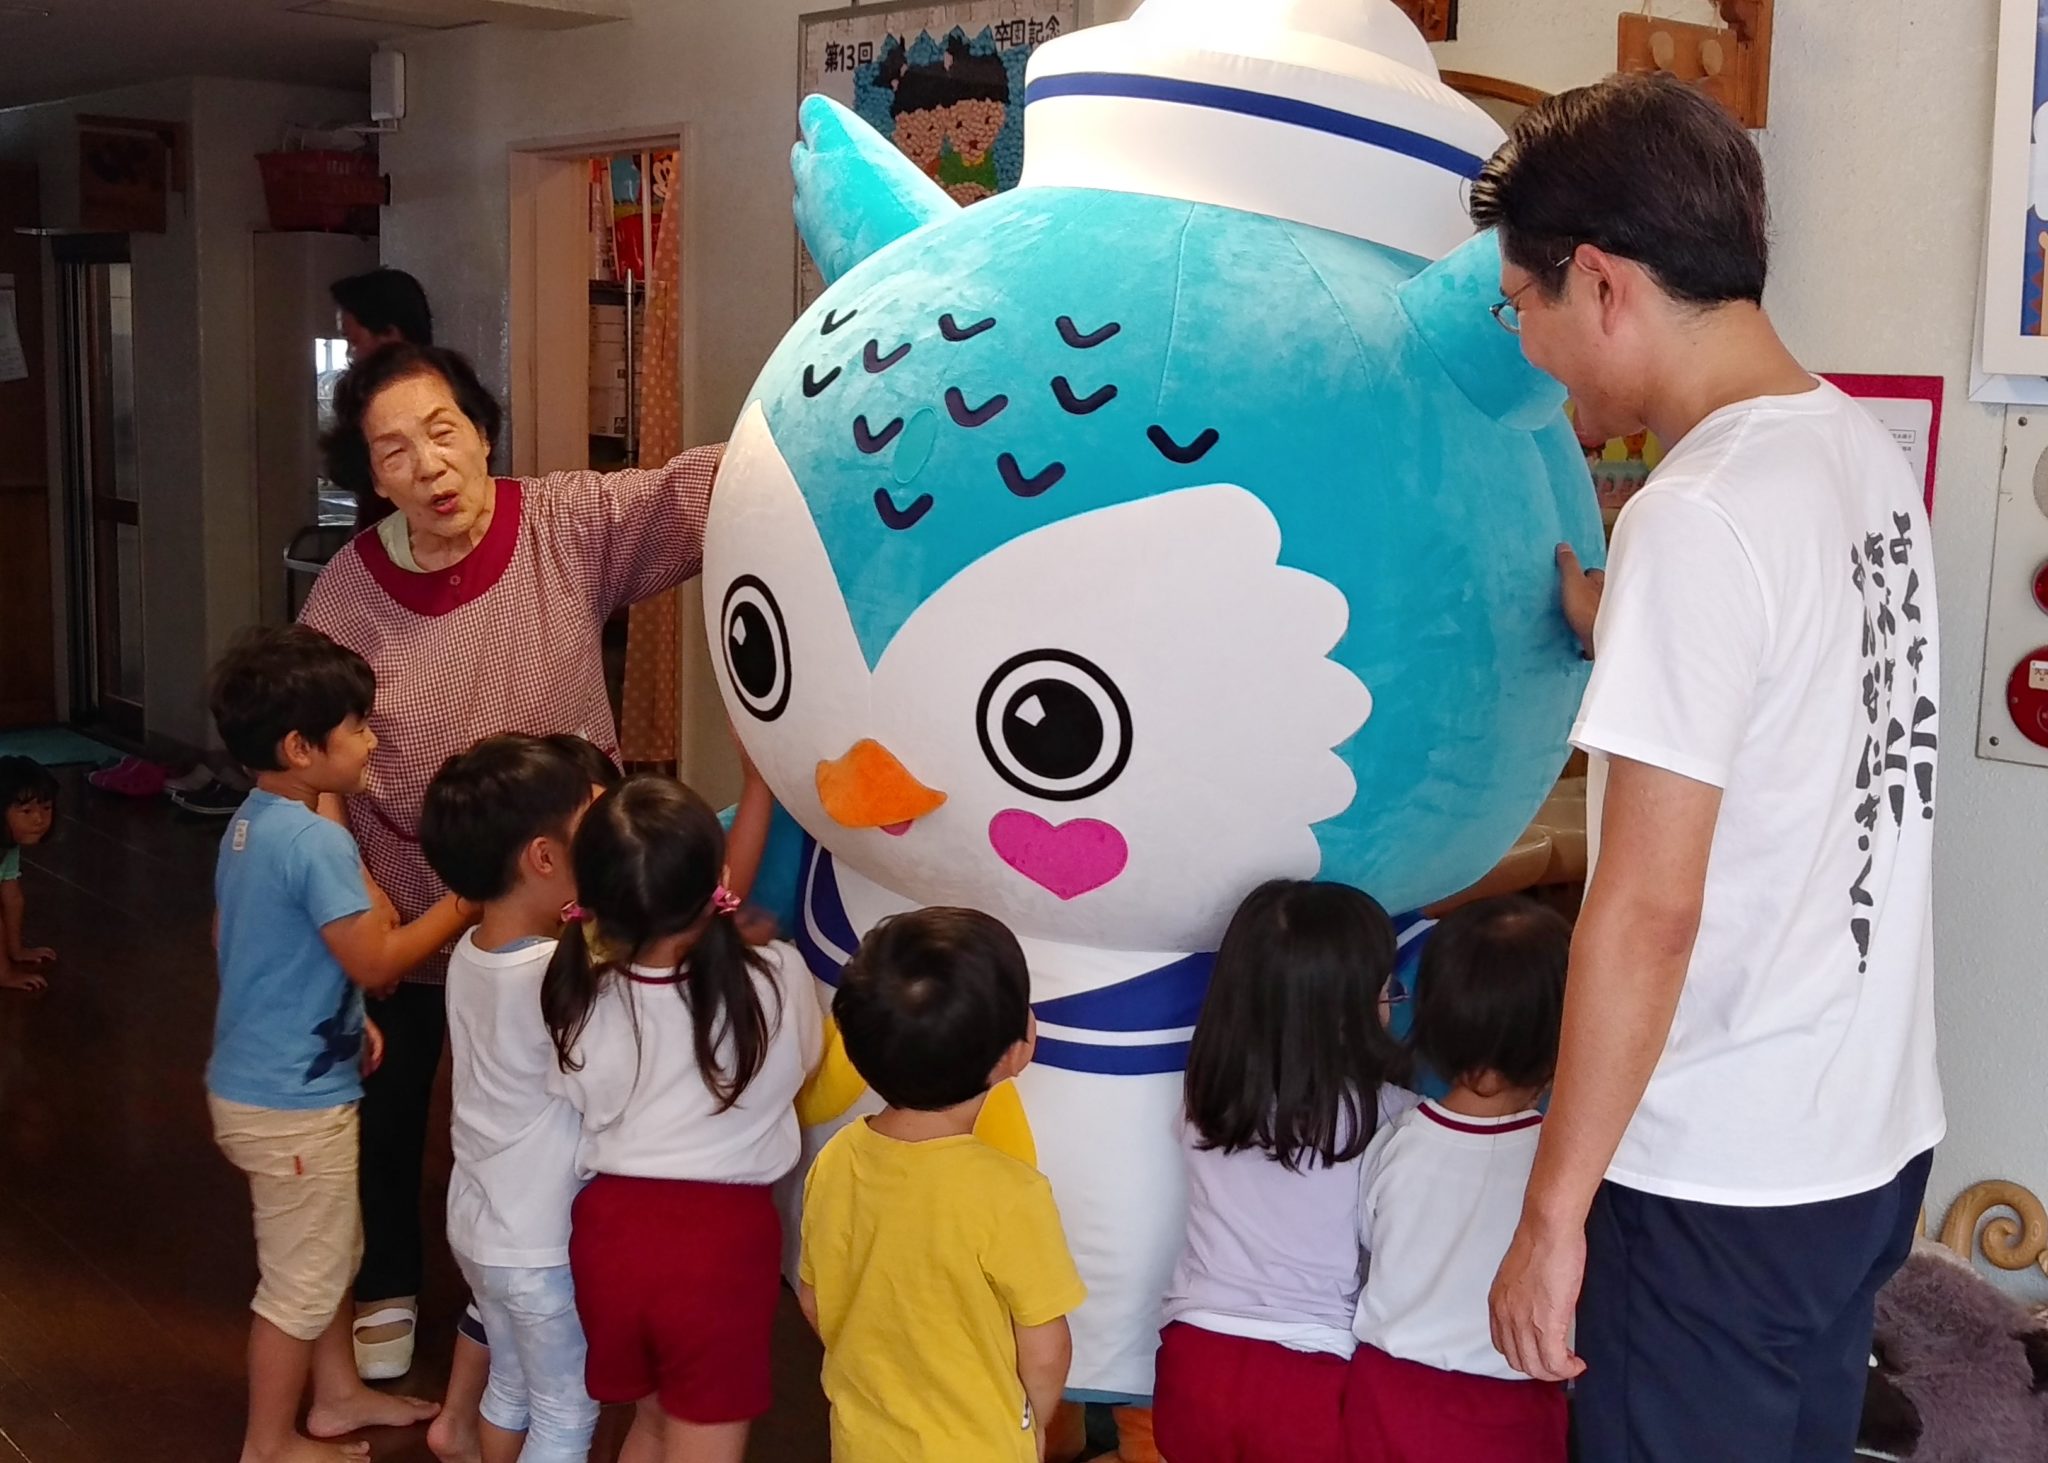 In fact, Kikuho feels good to touch and is always surrounded by children.